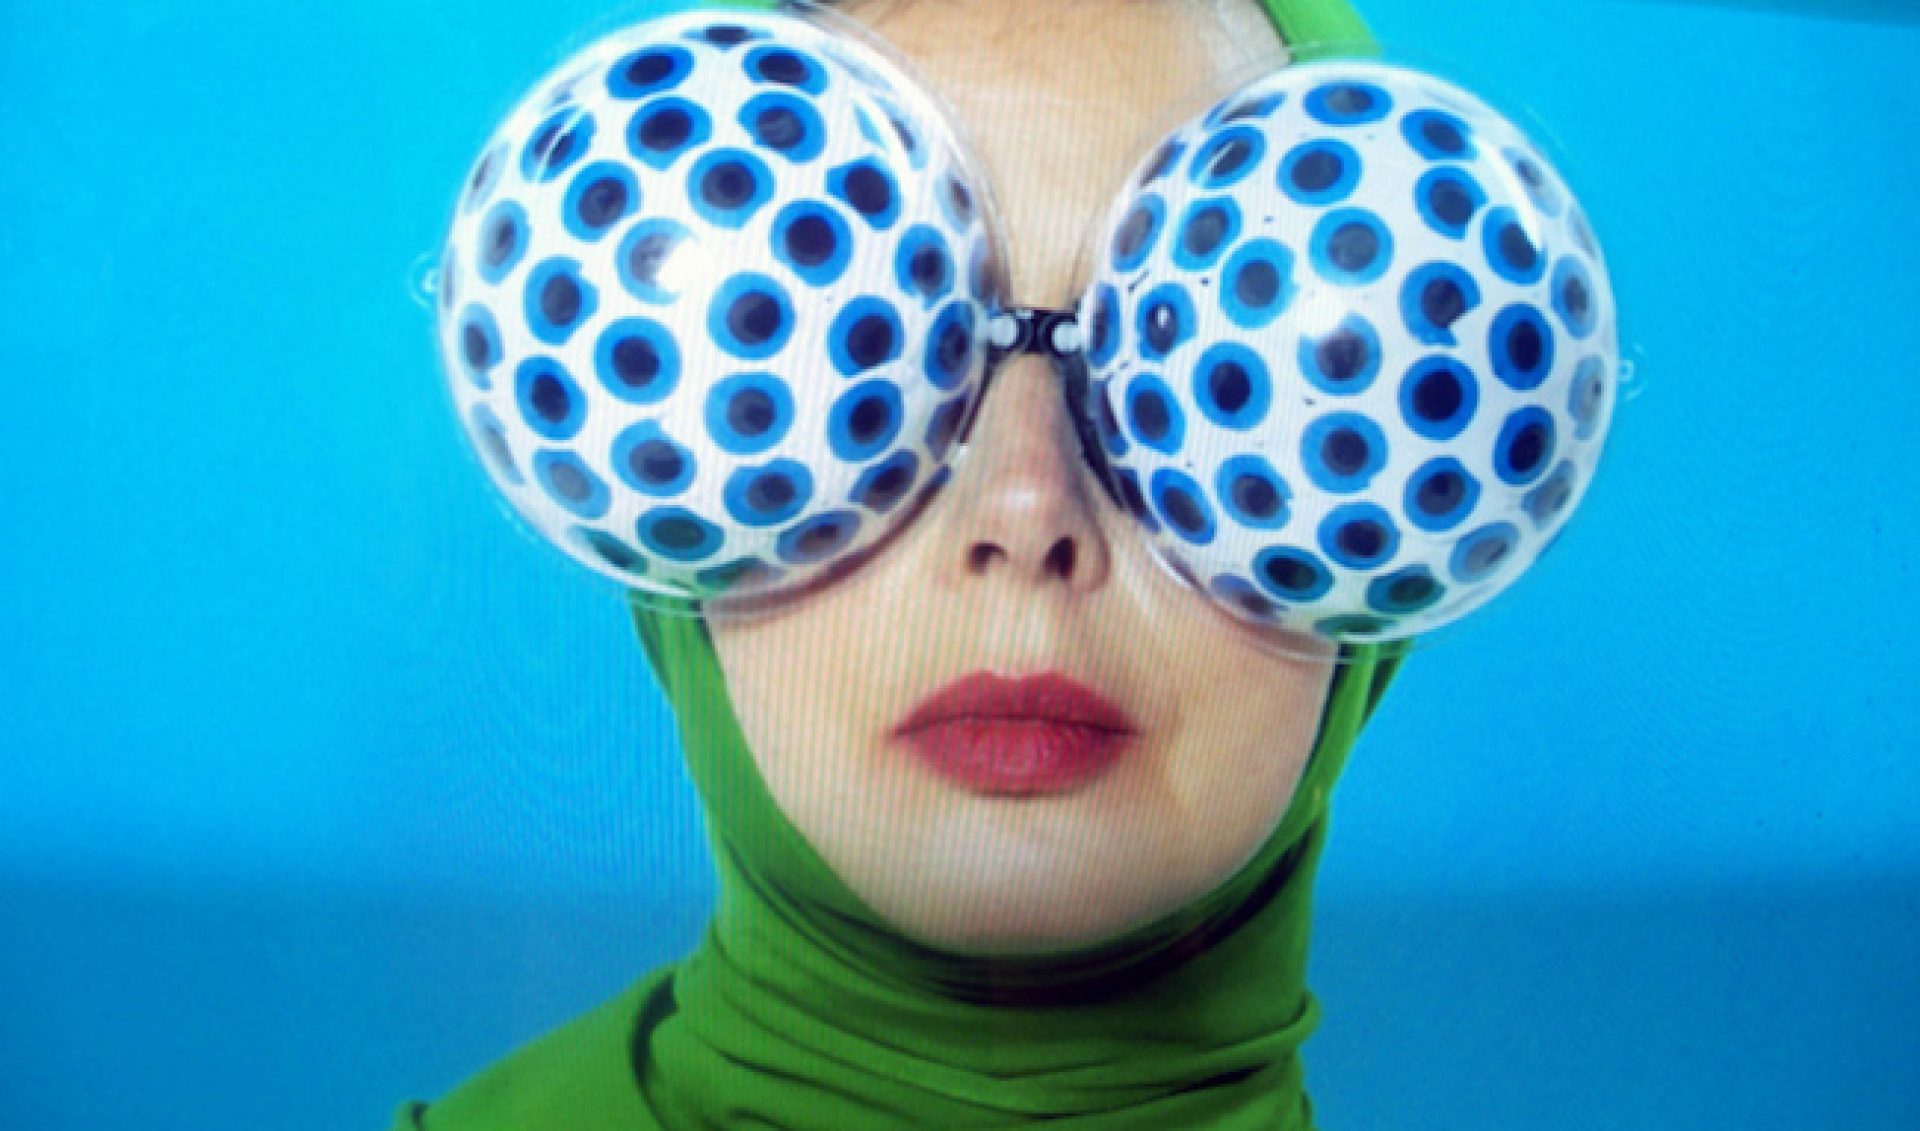 Isabella Rossellini’s ‘Green Porno’ Web Series Goes On Stage